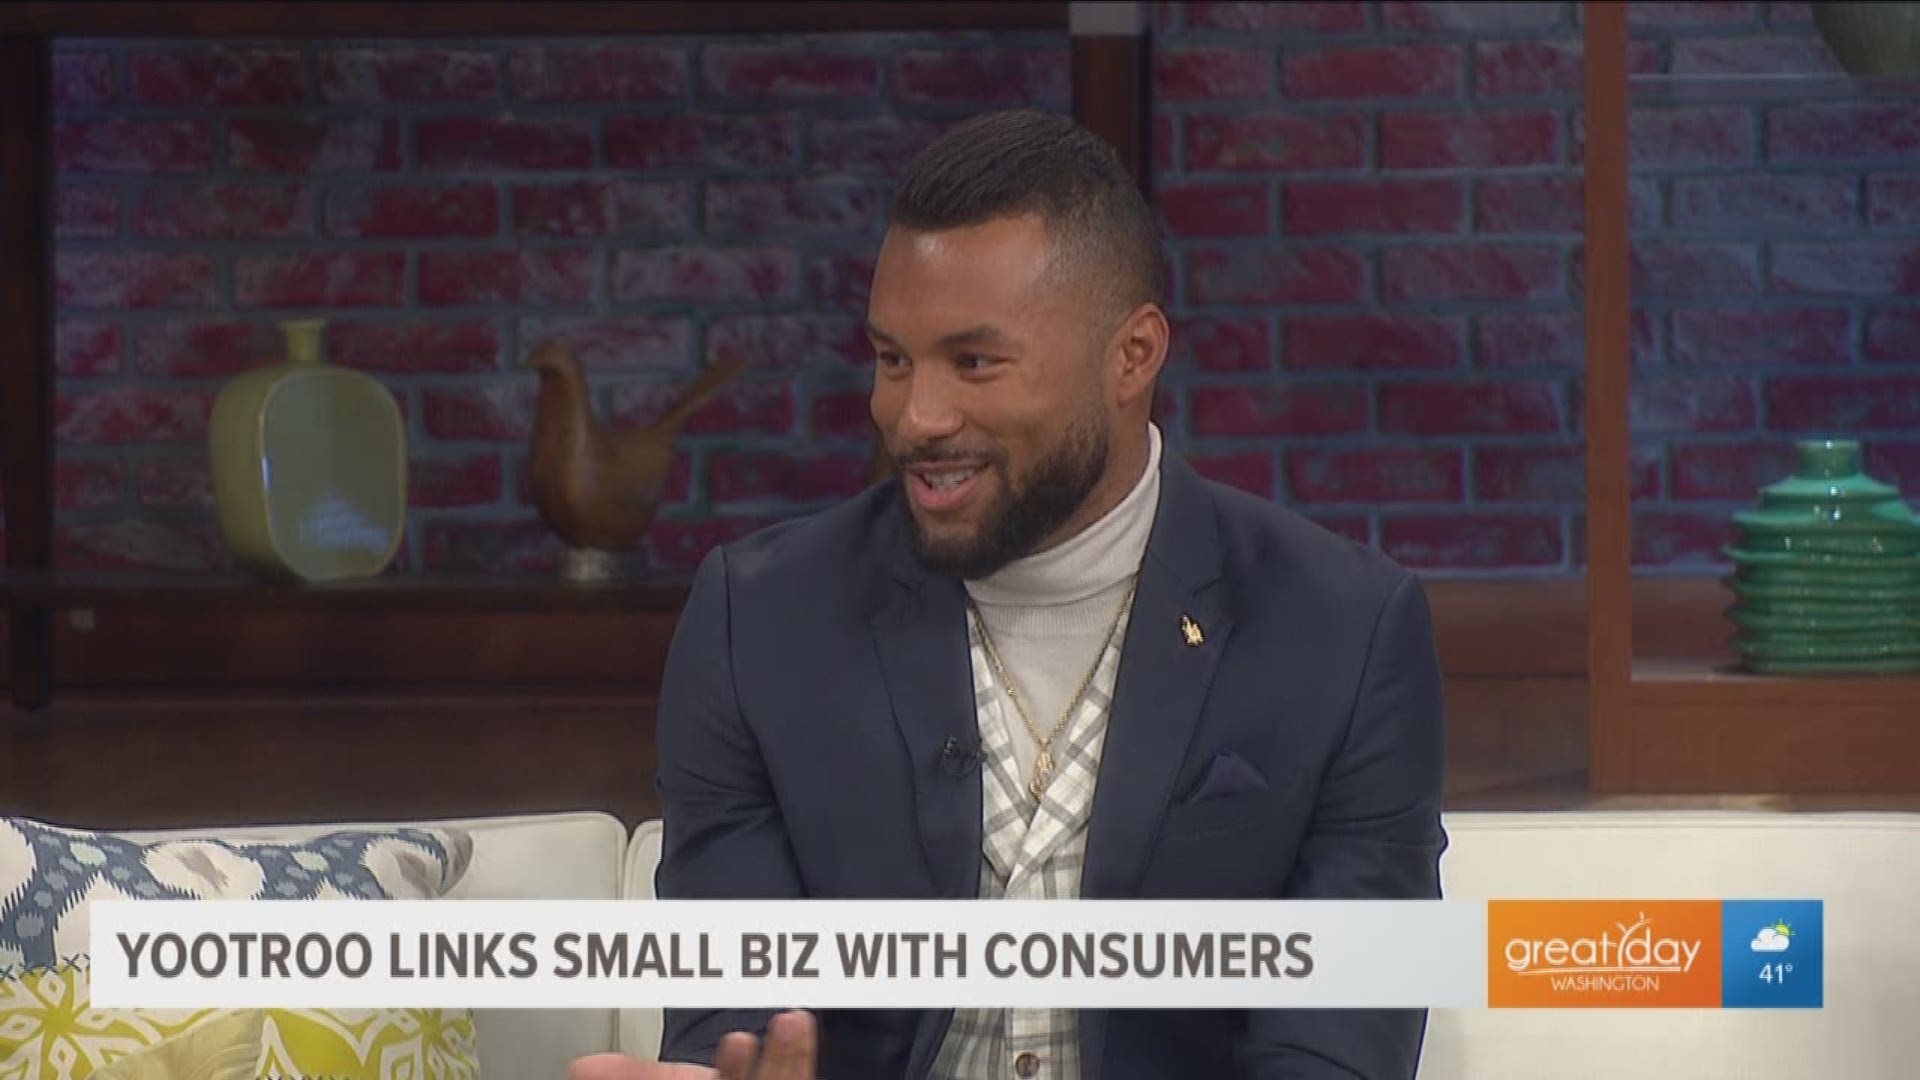 Former NFL player and CEO of YooTroo Nolan Carroll, explains how the new app can help small businesses get noticed by more consumers... and consumers can actually make money on the app!